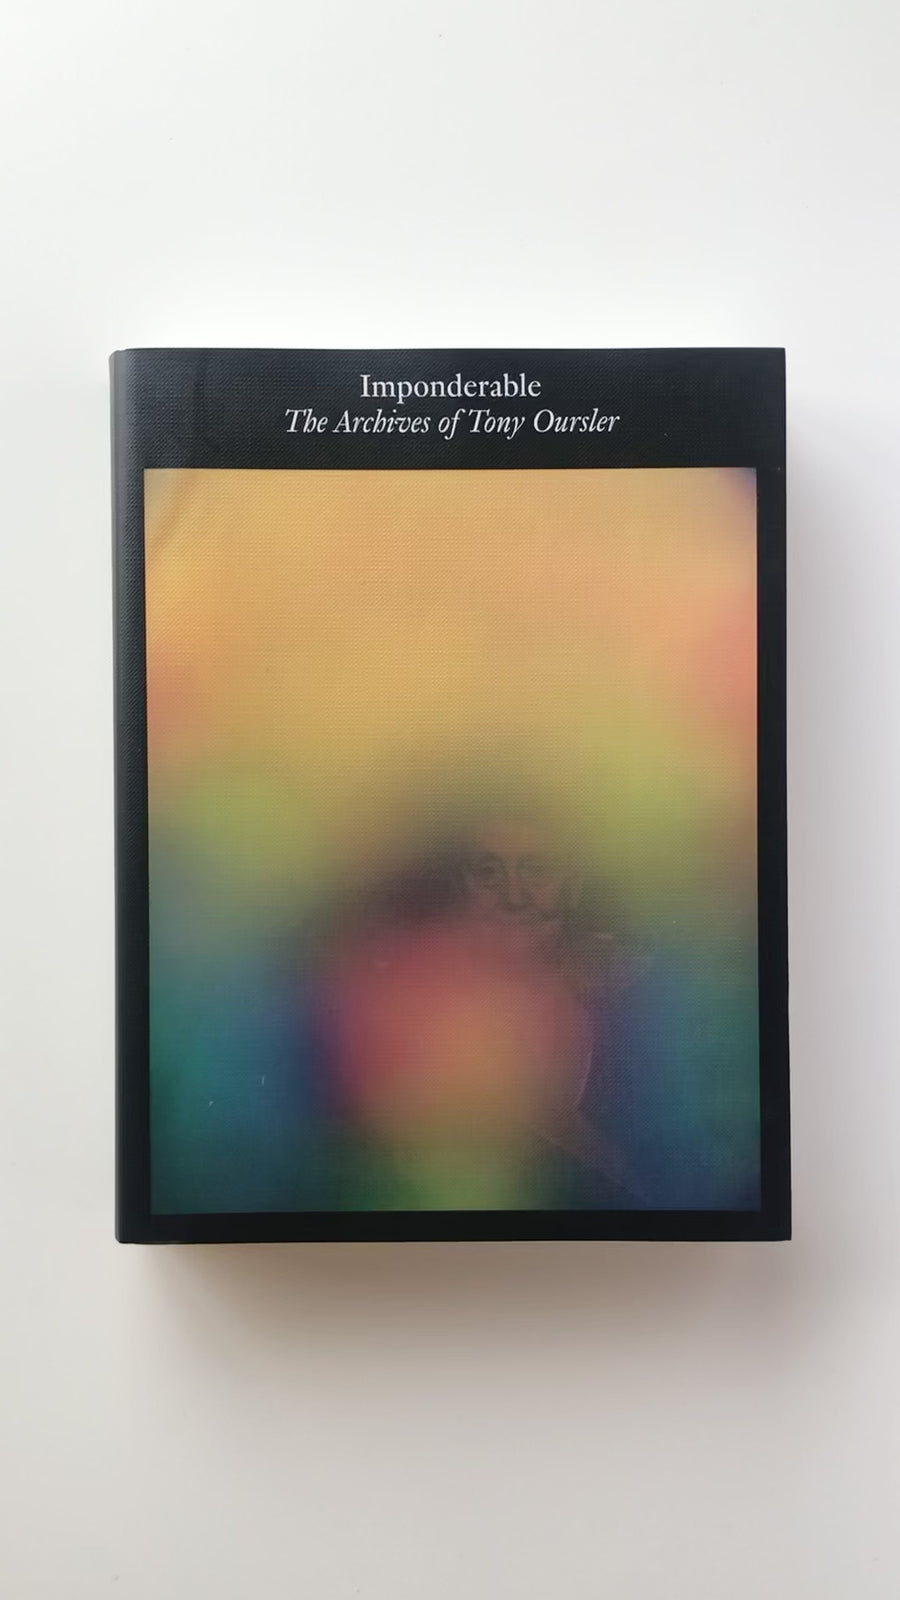 <tc>Imponderable: The Archives of Tony Oursler</tc>